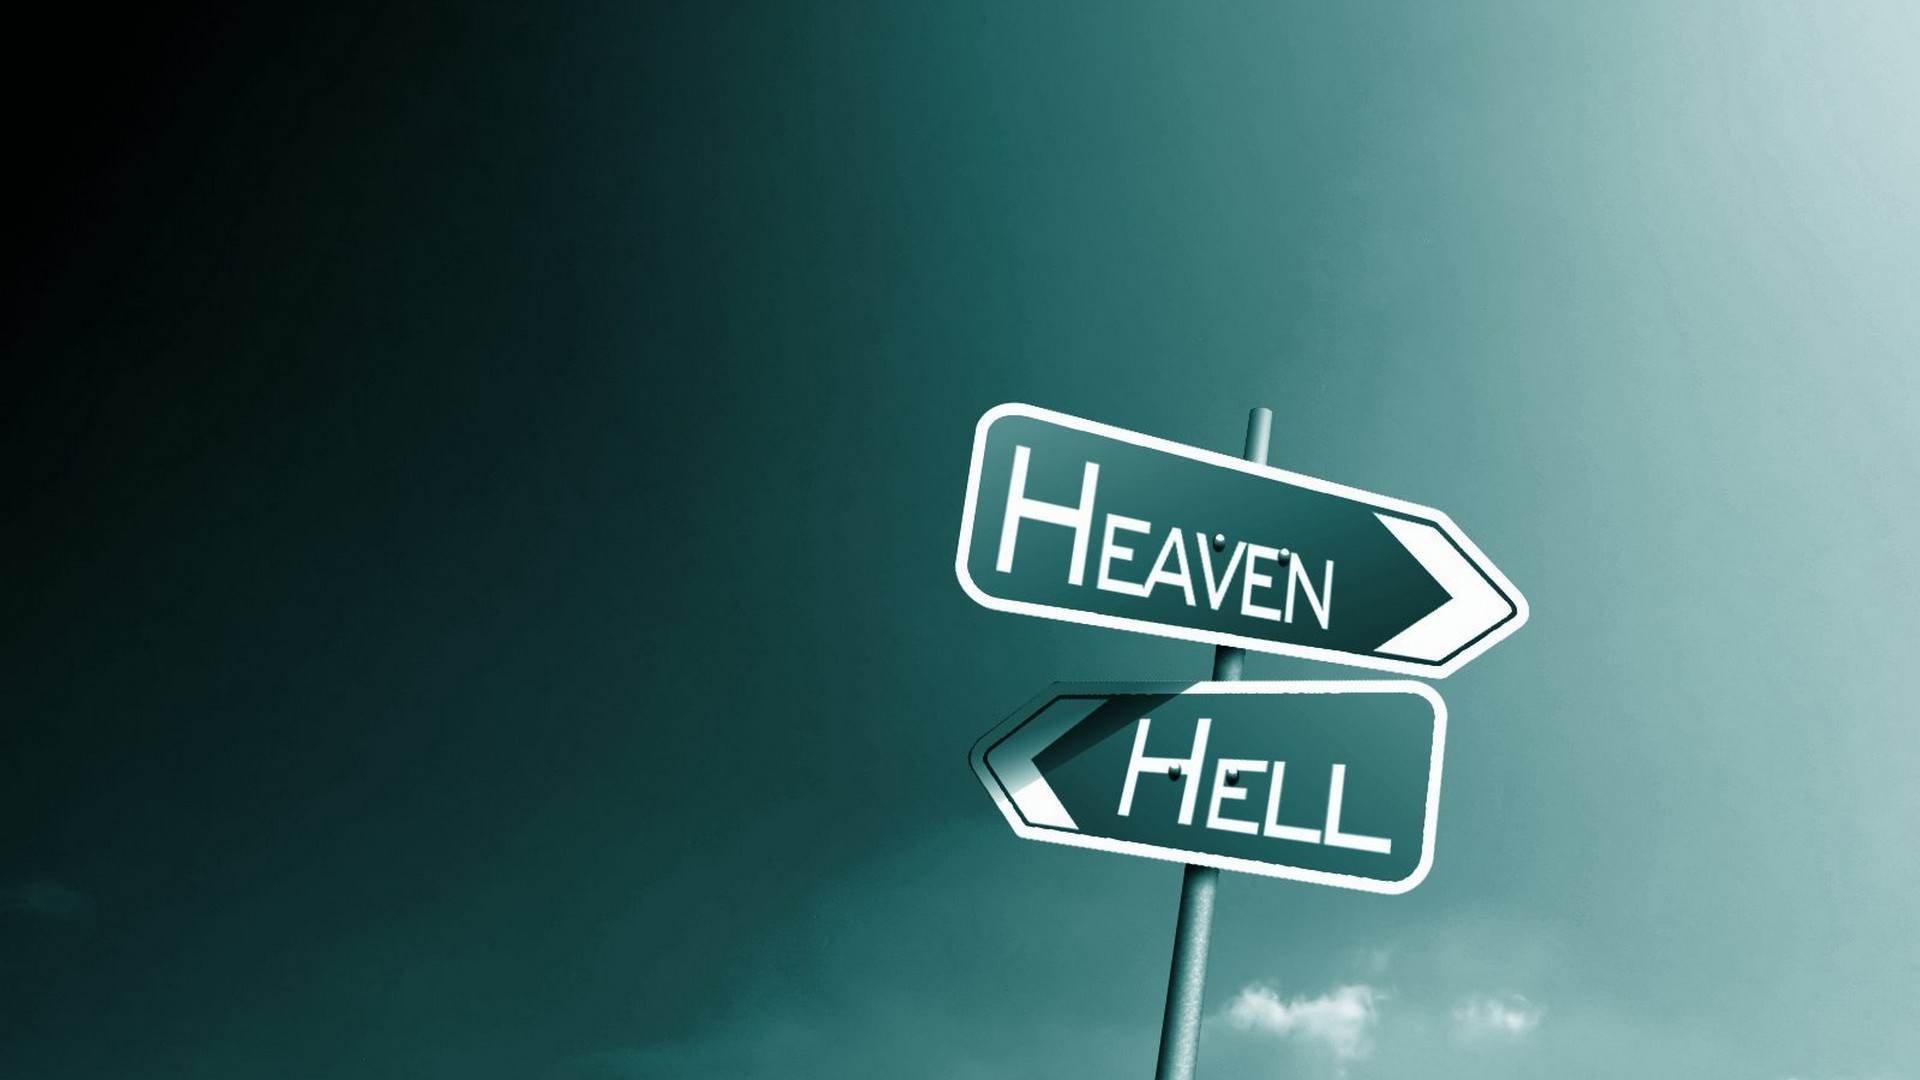 1920x1080 It is always up to you which path you choose, the path to heaven or hell